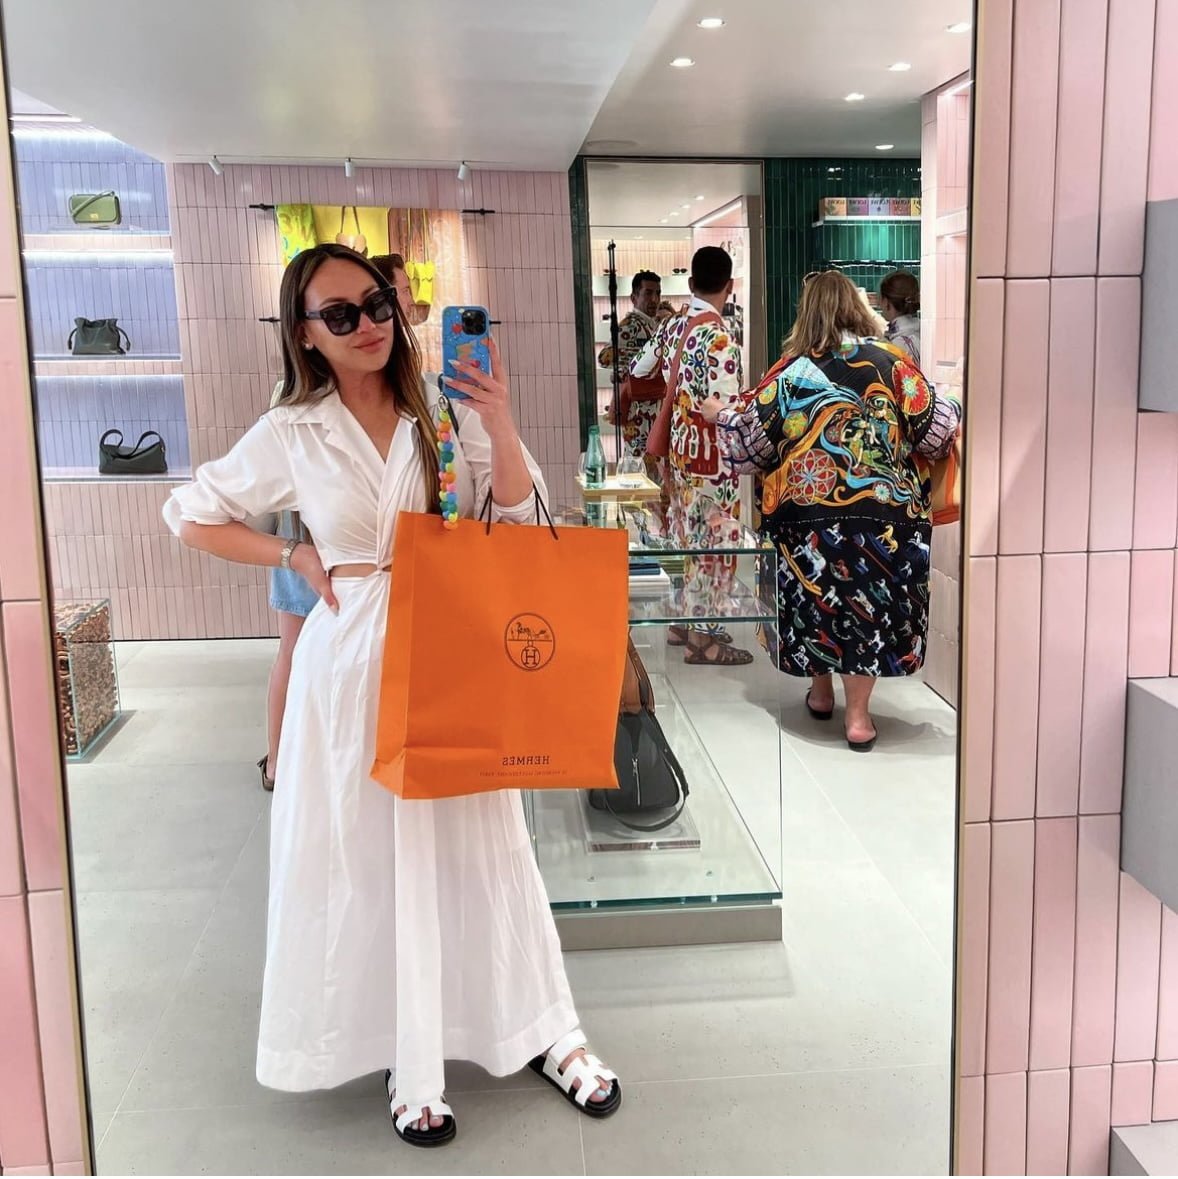 NetFlix Bling Empire NYC star Dorothy Wang is out shopping in Europe taking a mirror selfie. She is carrying a large orange Hermes shopping bag. She is wearing a white linen two piece outfit with matching white Hermes leather Chypre sandals.